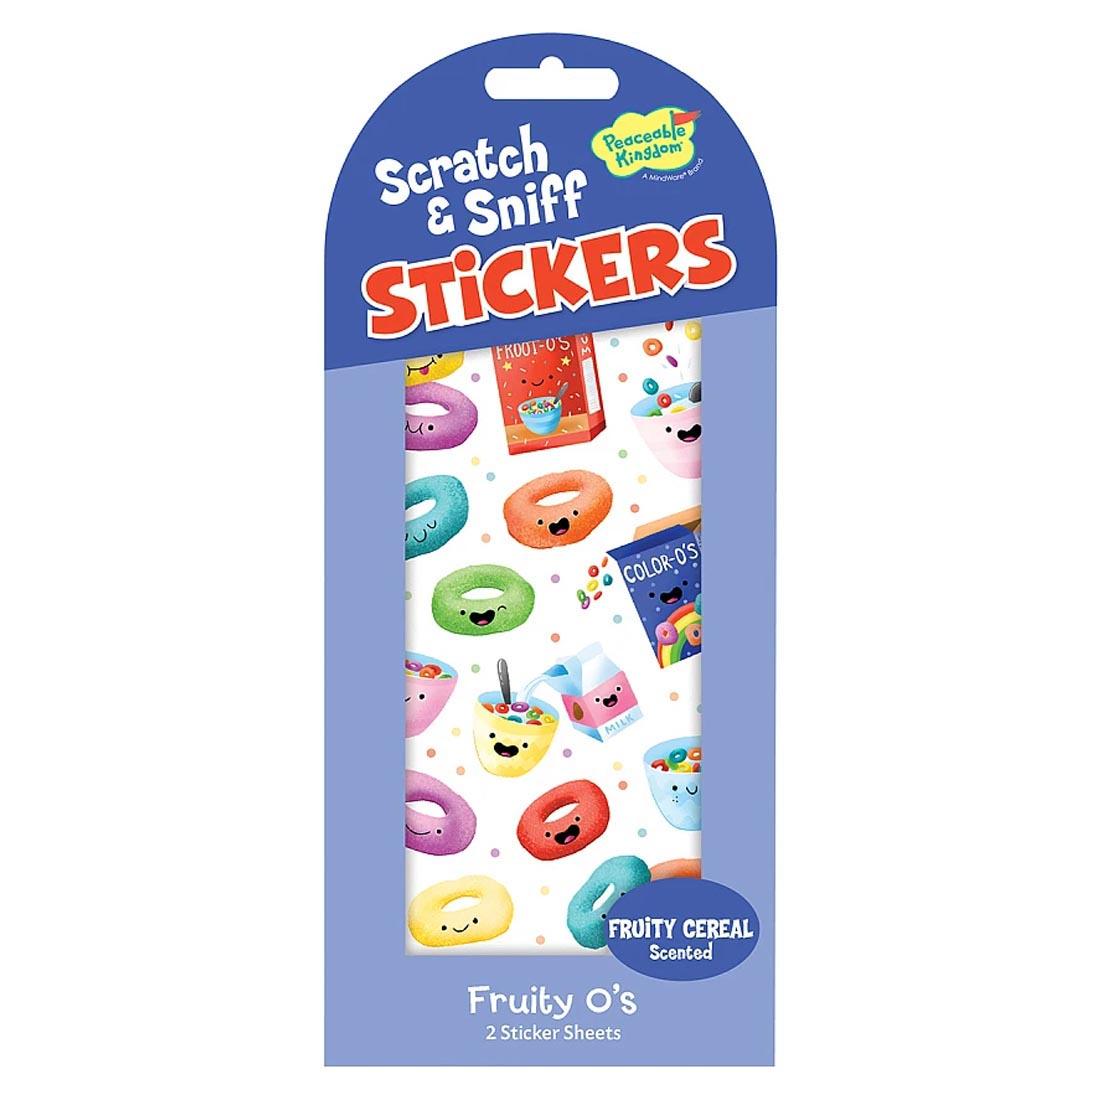 Fruity O's Scratch & Sniff Stickers by Peaceable Kingdom